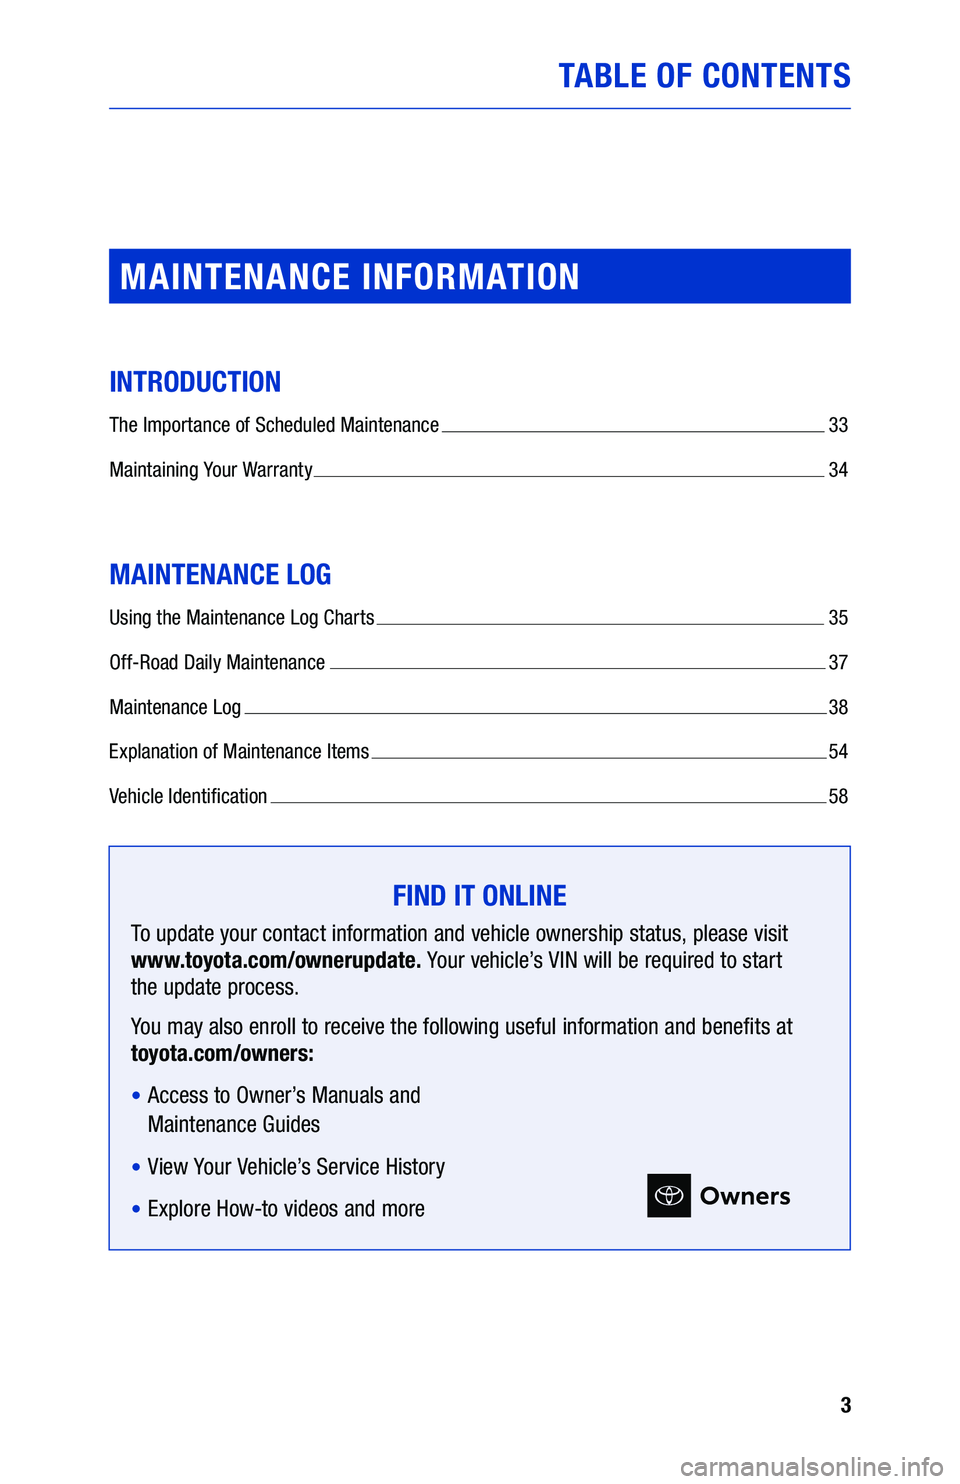 TOYOTA SEQUOIA 2020  Warranties & Maintenance Guides (in English) 3
TABLE OF CONTENTS
MAINTENANCE INFORMATION
INTRODUCTION
The Importance of Scheduled Maintenance  33
Maintaining Your Warranty 
  34
MAINTENANCE LOG
Using the Maintenance Log Charts   35
Off-Road Dail